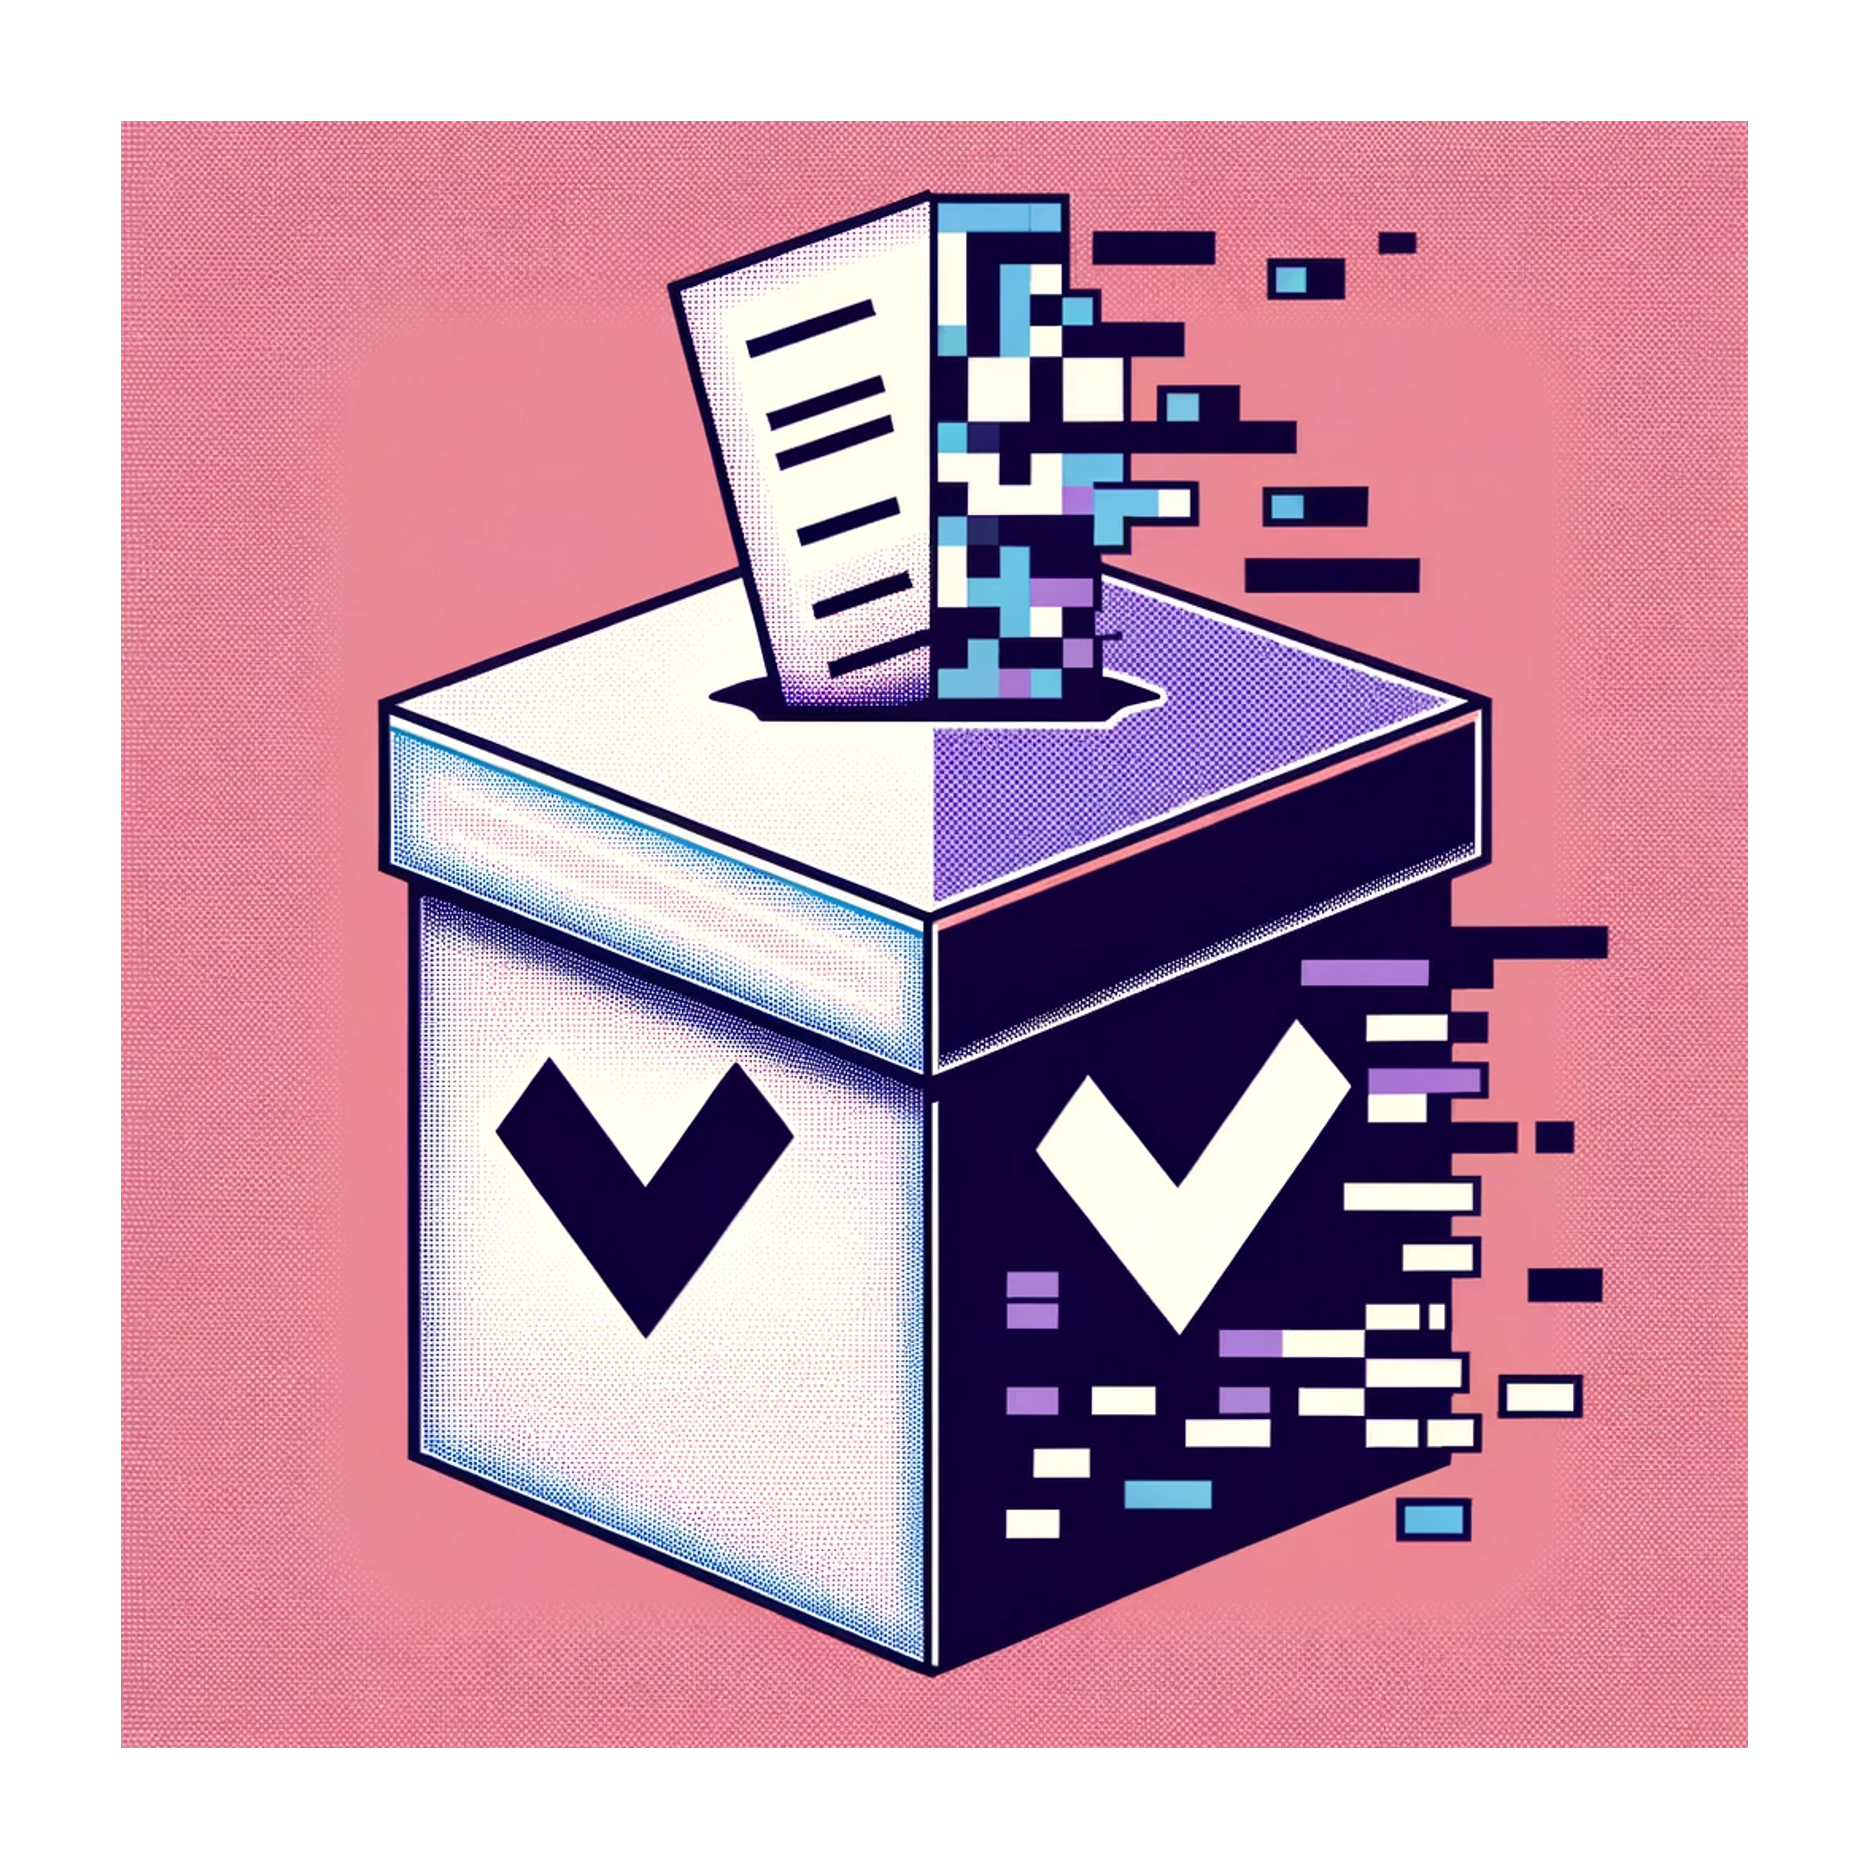 Illustration of a ballot box with half of it appearing normal and the other half pixelated, showing the transformation of a genuine vote into a manipulated vote